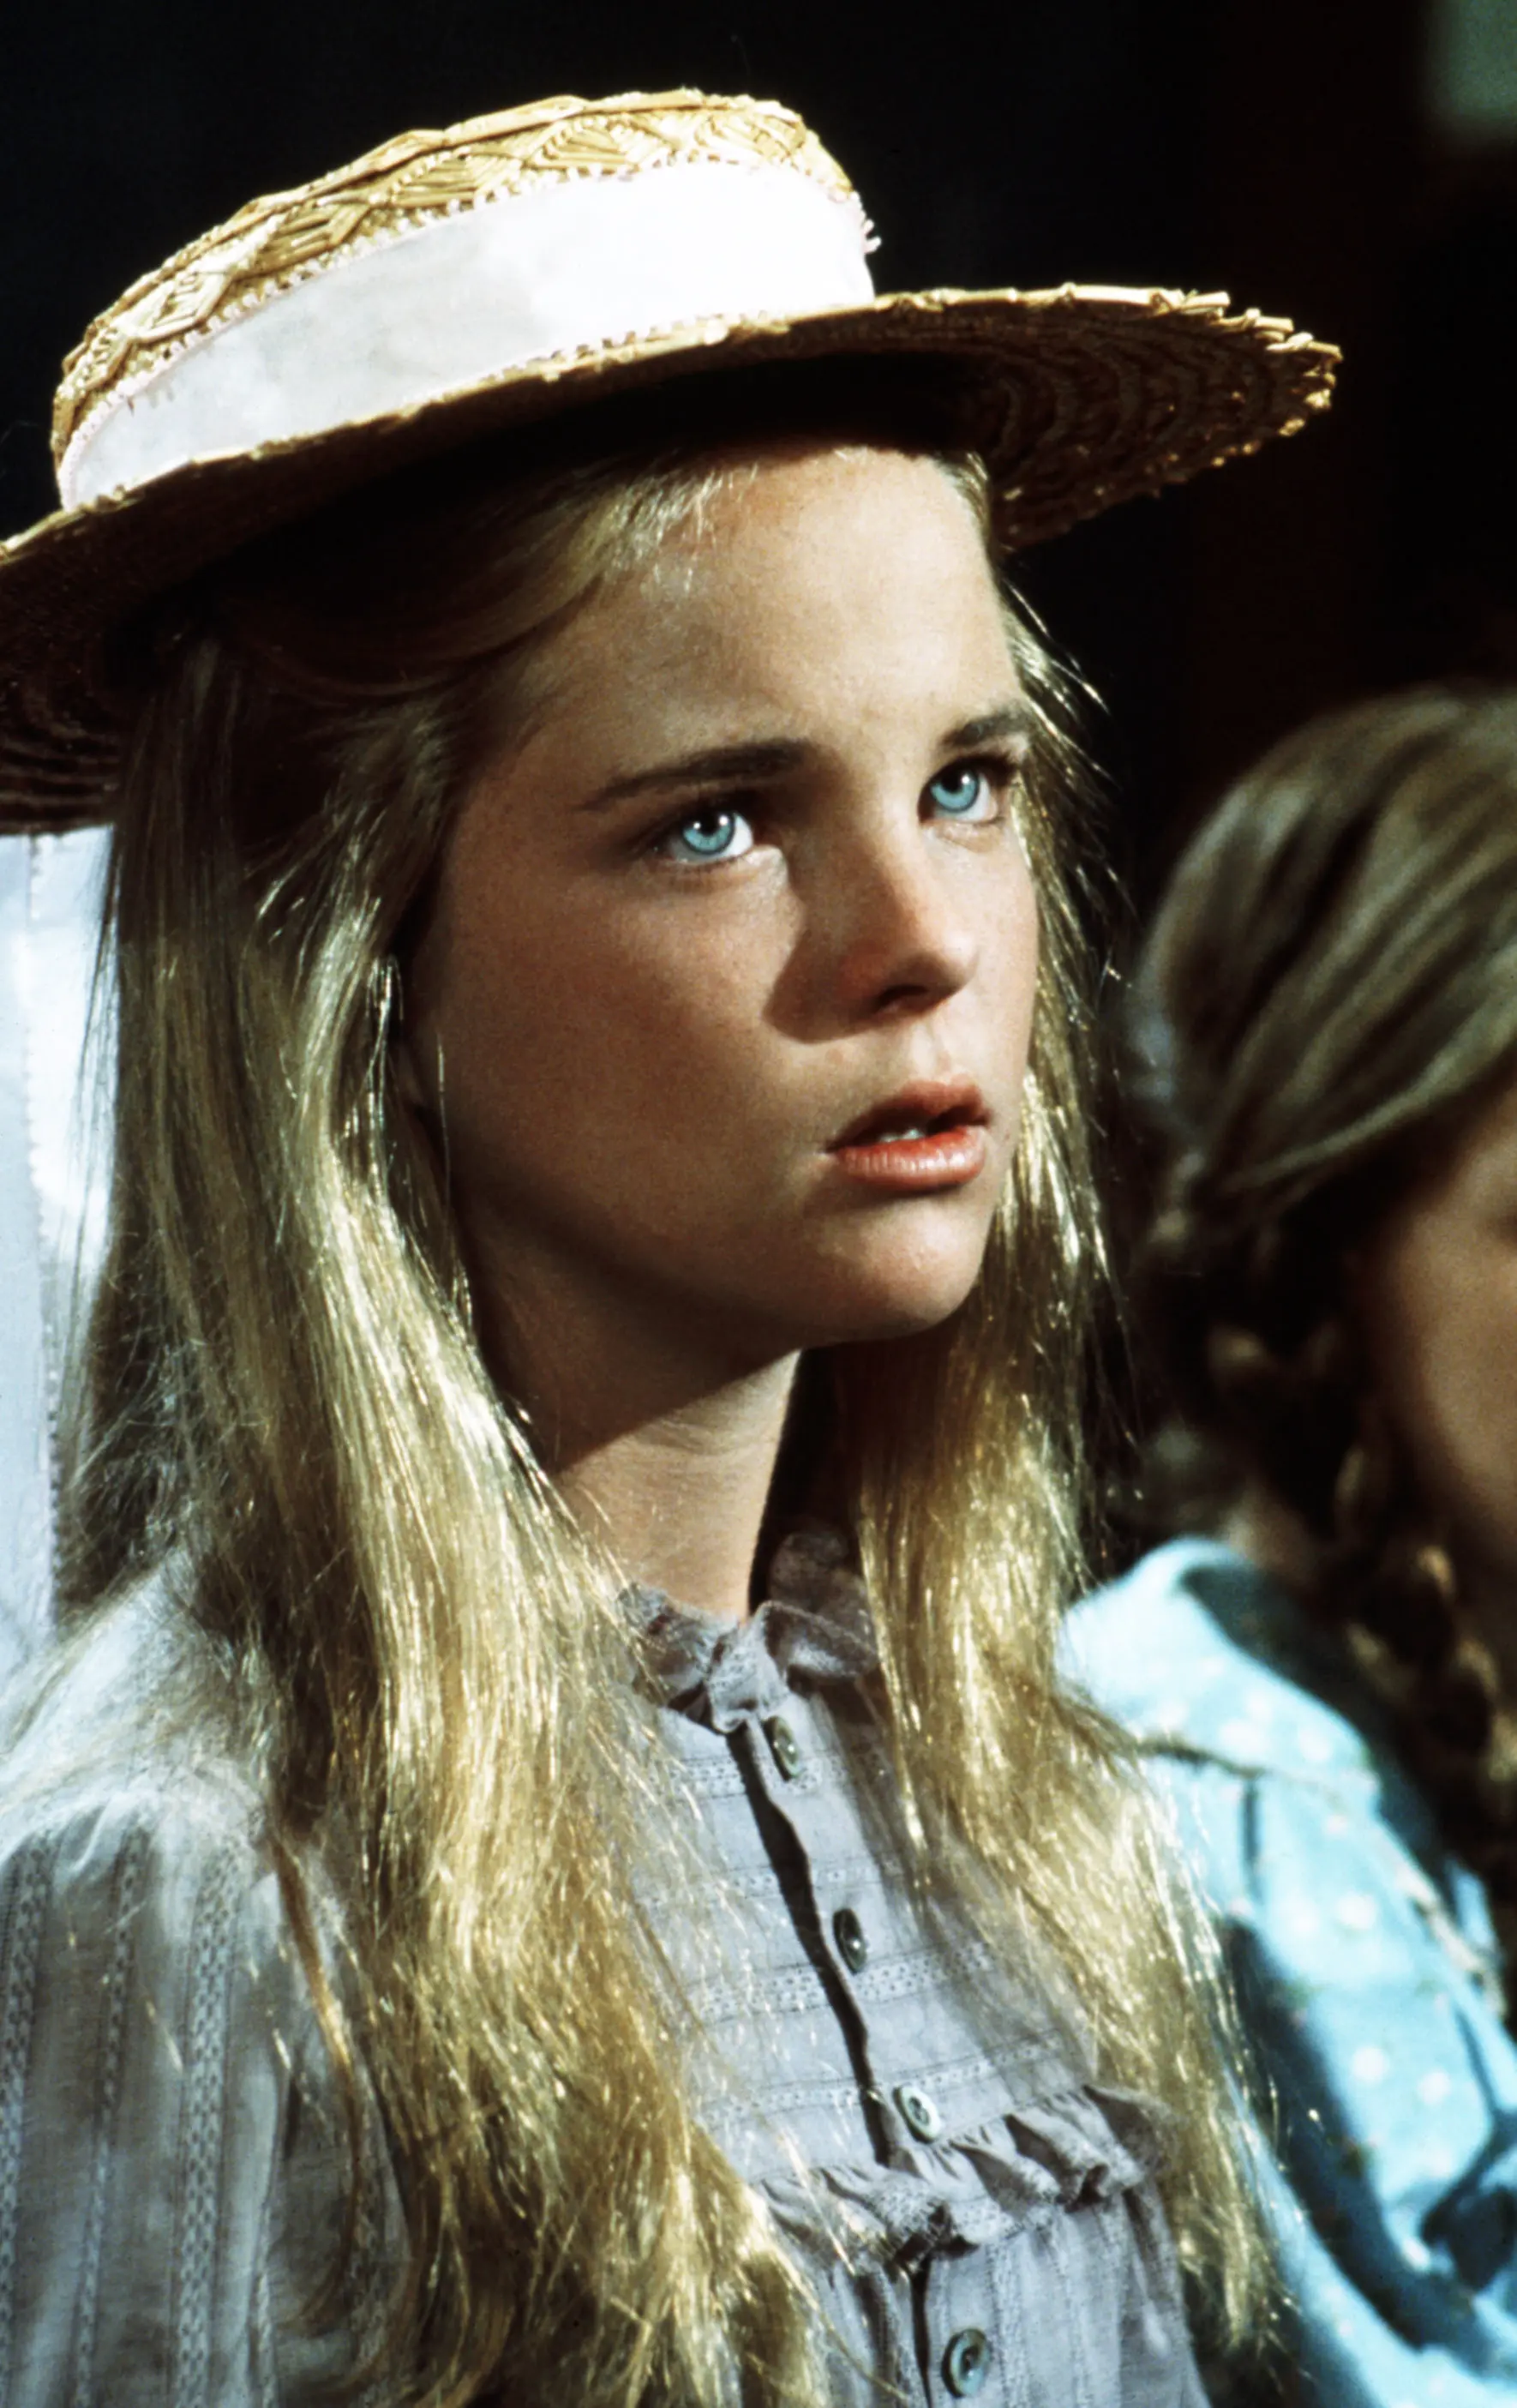 LITTLE HOUSE ON THE PRAIRIE, Melissa Sue Anderson